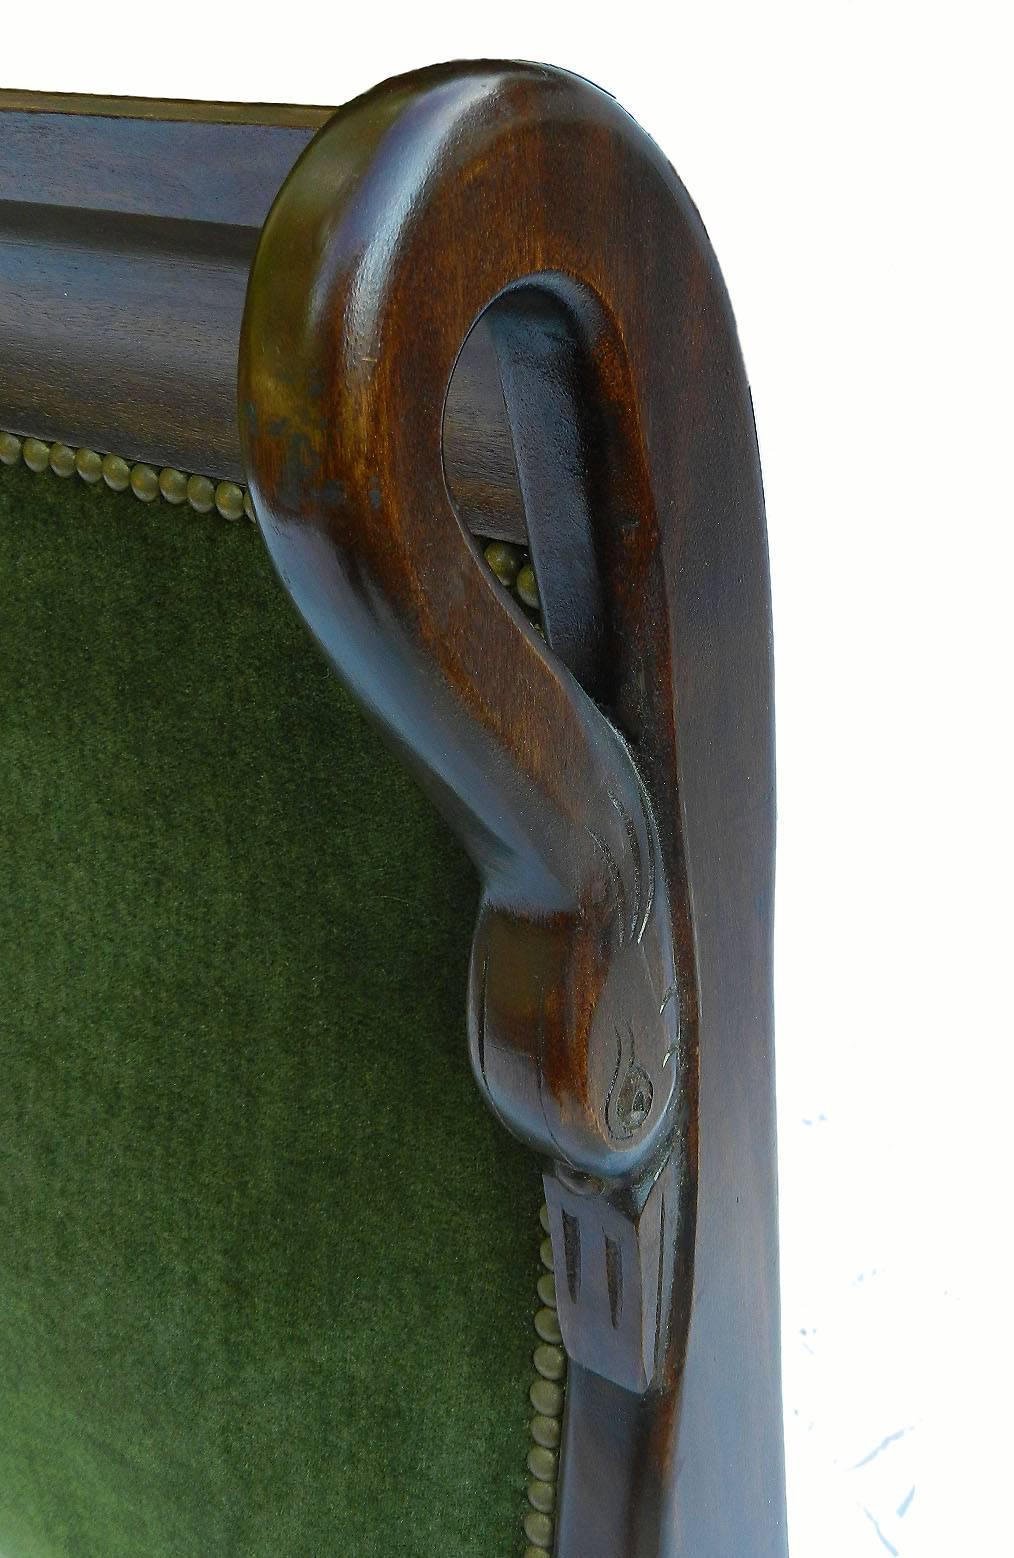 Handsome French second empire bed or daybed mahogany swans neck.
Upholstered in dark green velour easily changed to suit your interior please ask if you would like this done before shipping we're always happy to help please ask
Three quarter or